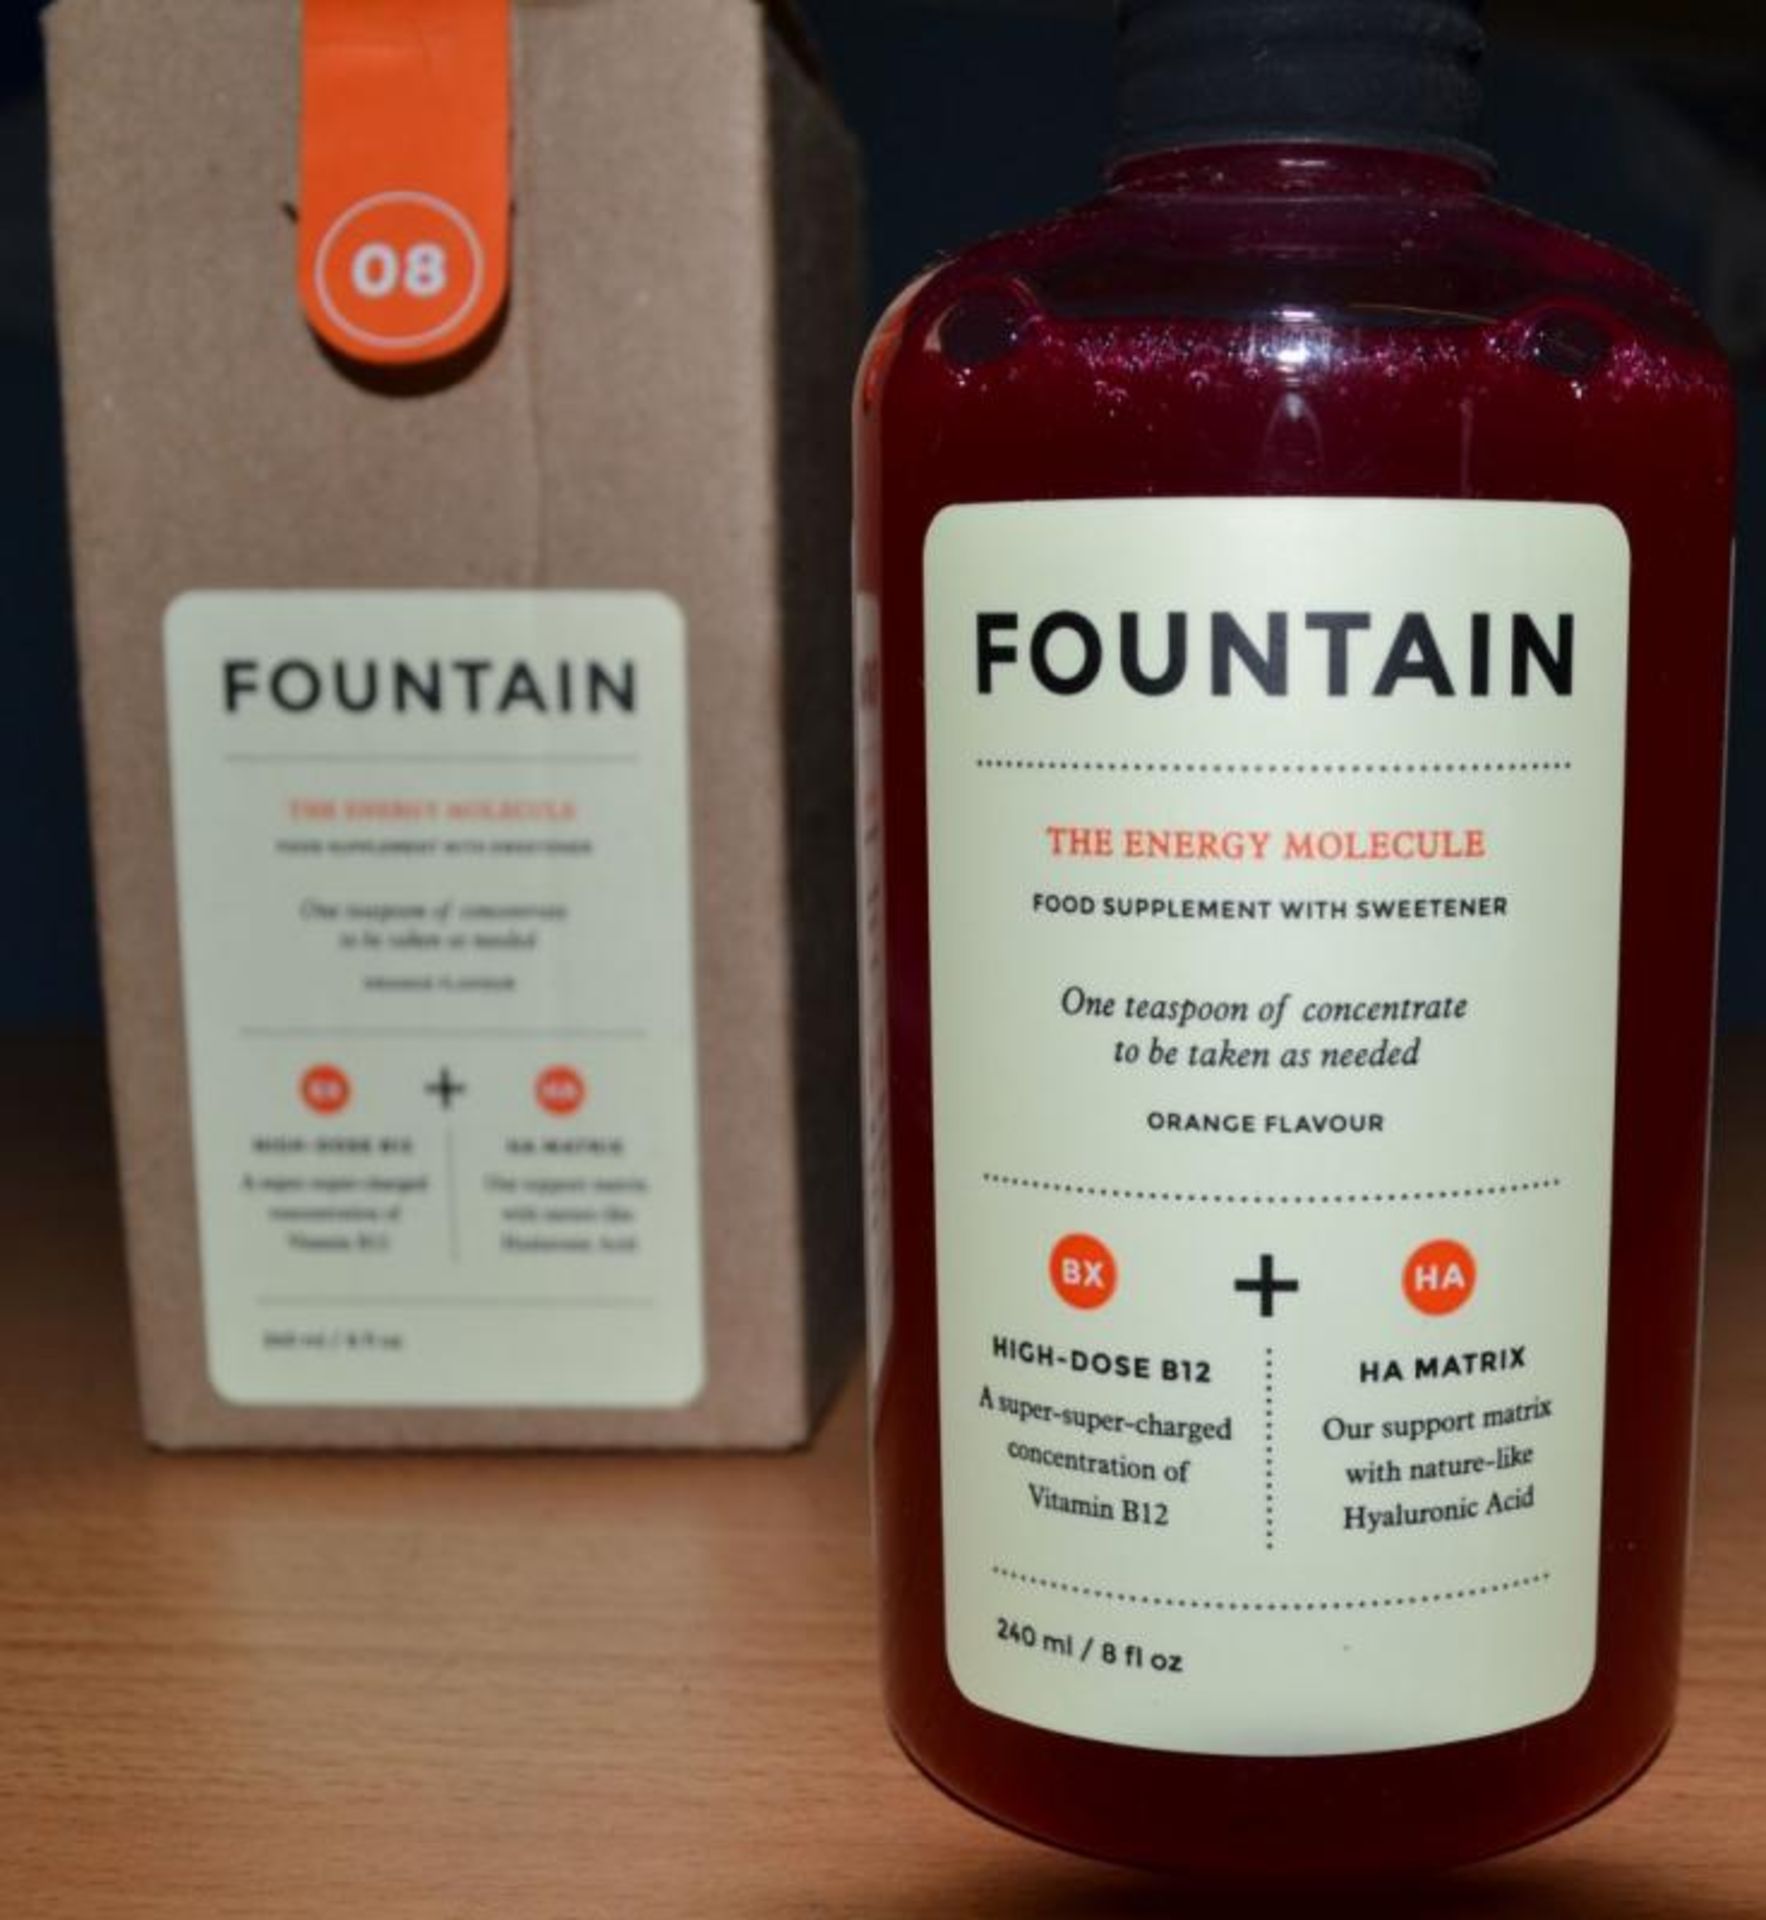 10 x 240ml Bottles of Fountain, The Energy Molecule Supplement - New & Boxed - CL185 - Ref: - Image 2 of 7